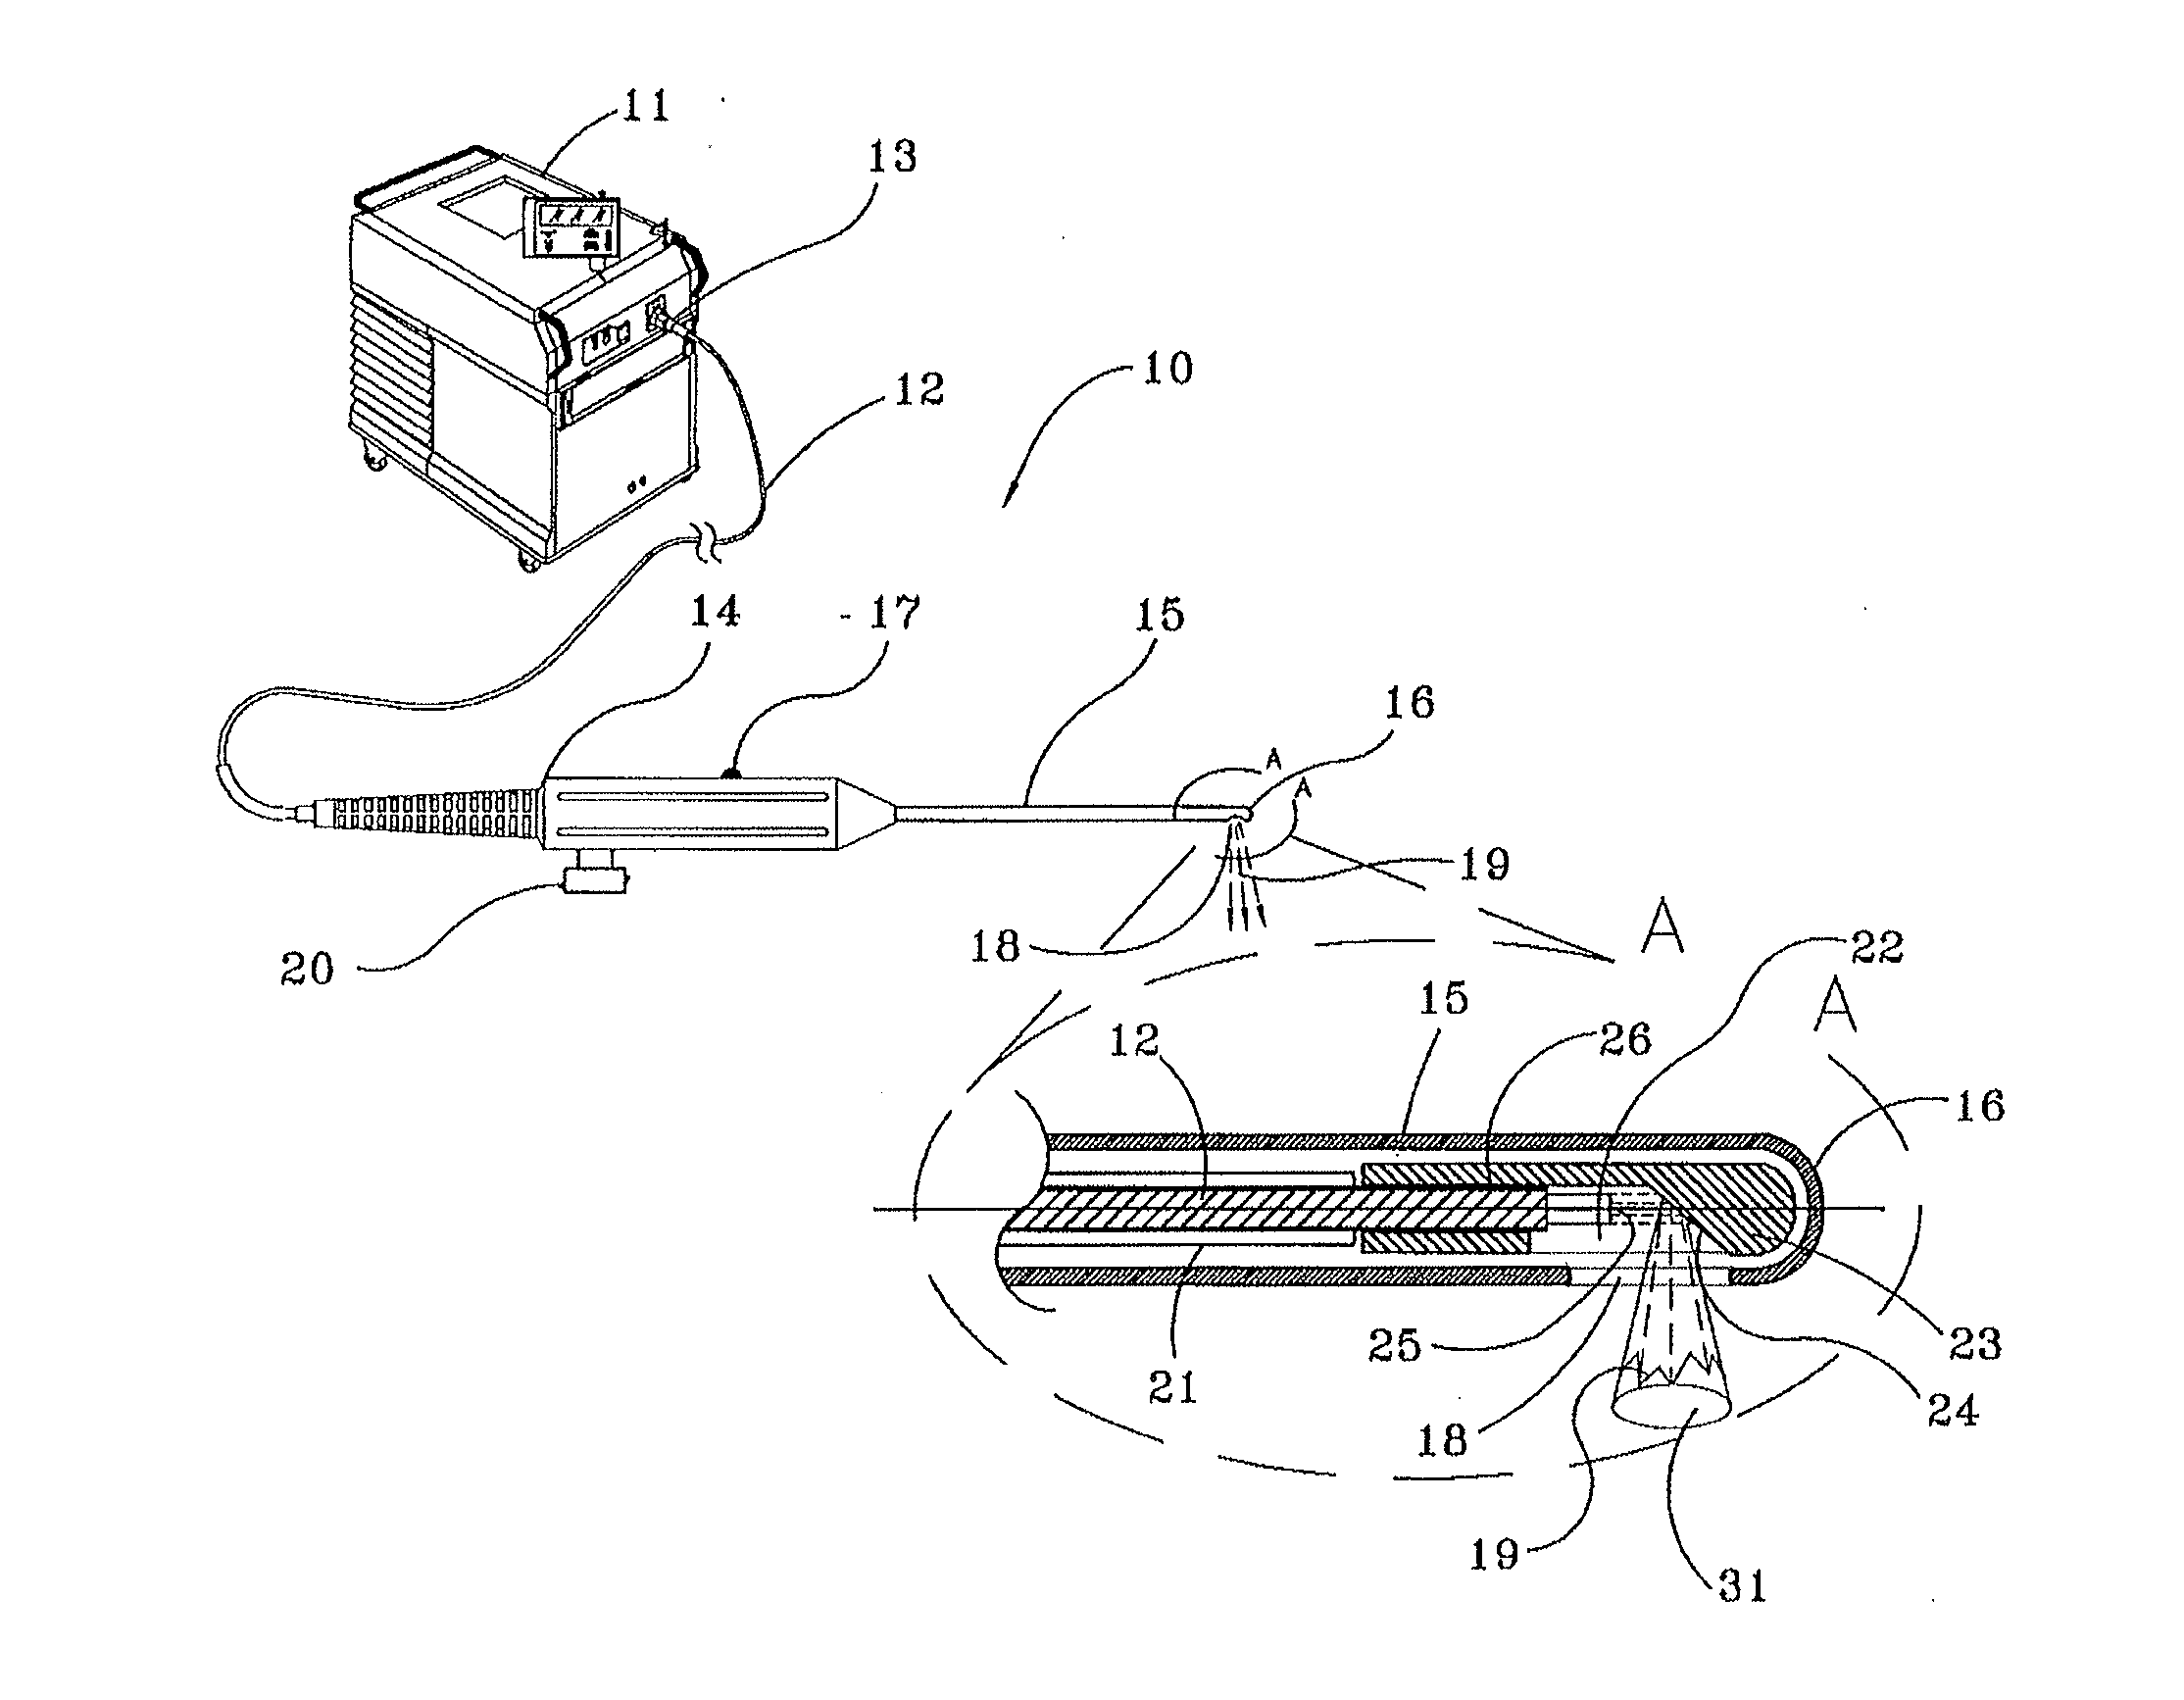 Novel devices for effective and uniform shrinkage of tissues and their unique methods of use